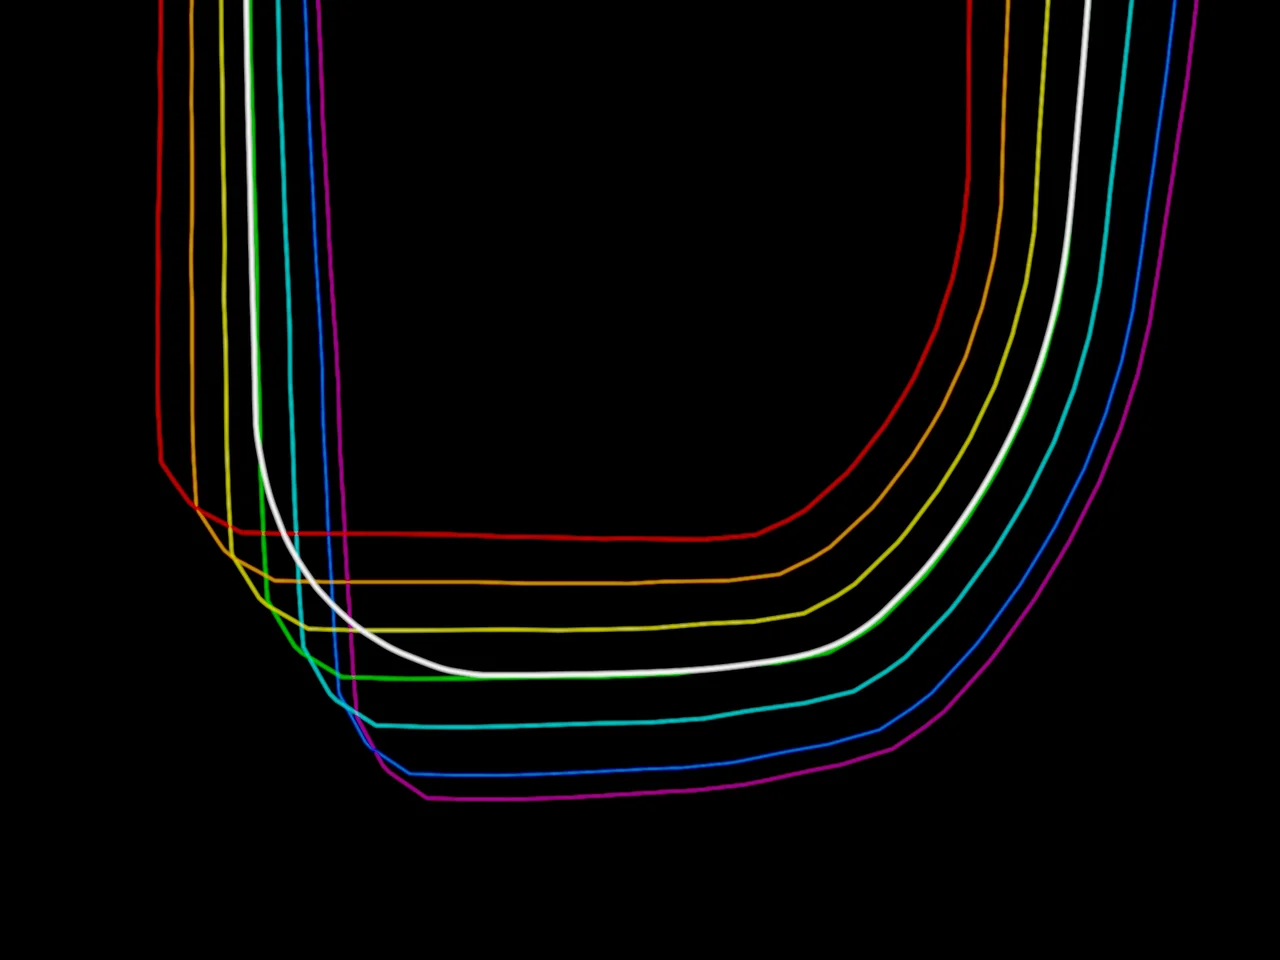 Seven colored lines, with a thick white line representing the golden surface